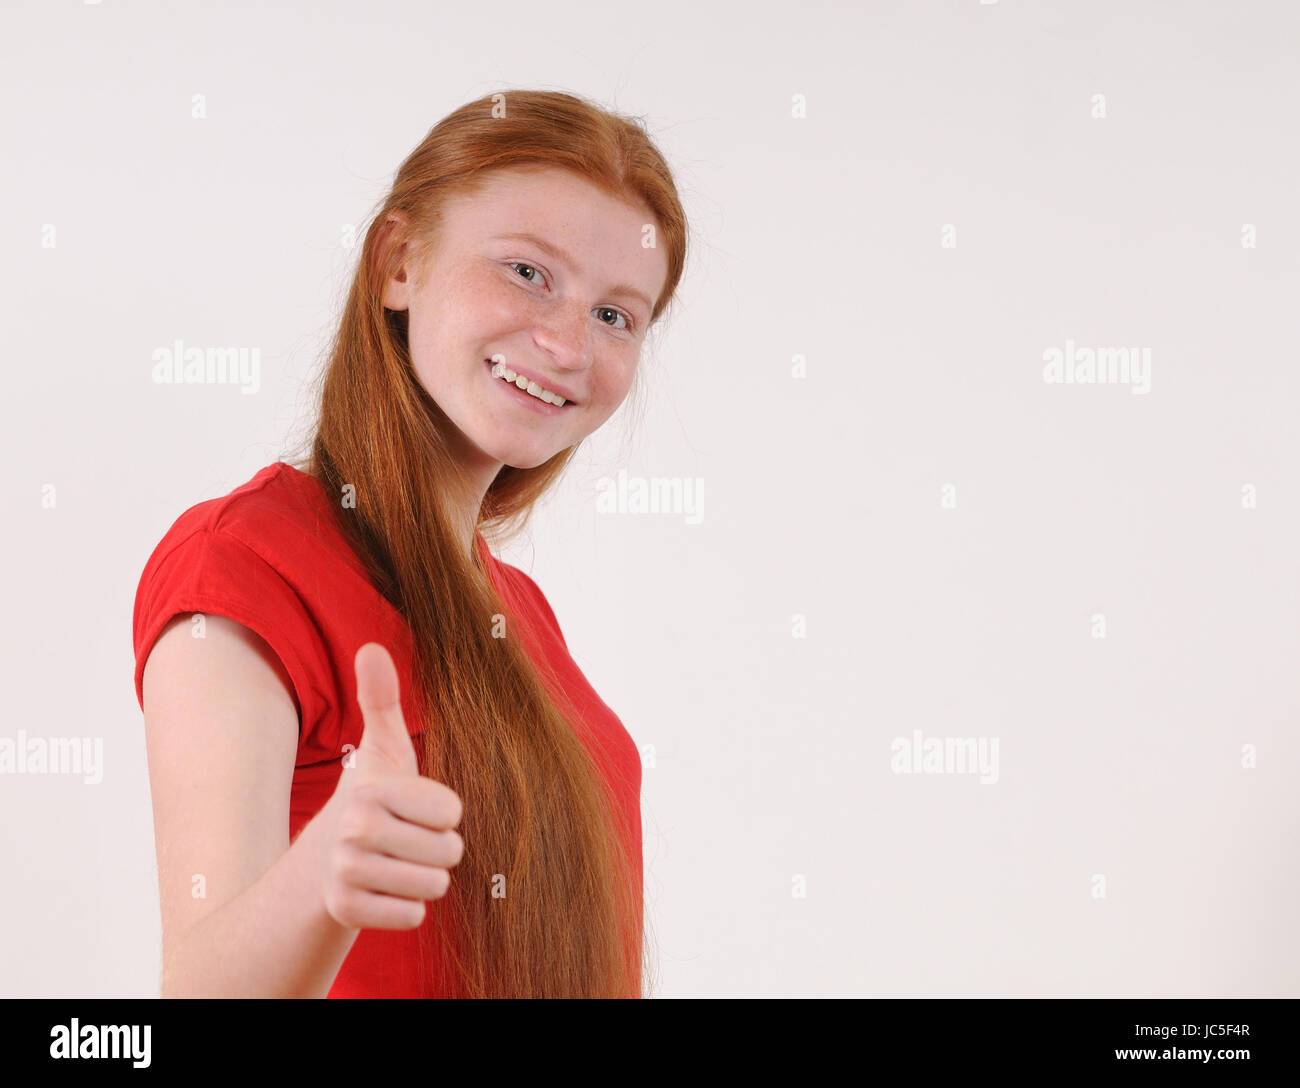 Red hair tennager girl in a red shirt showing a thumbs-up on grey background. Happy smiling lifestyle people concept. Human emotions. Stock Photo